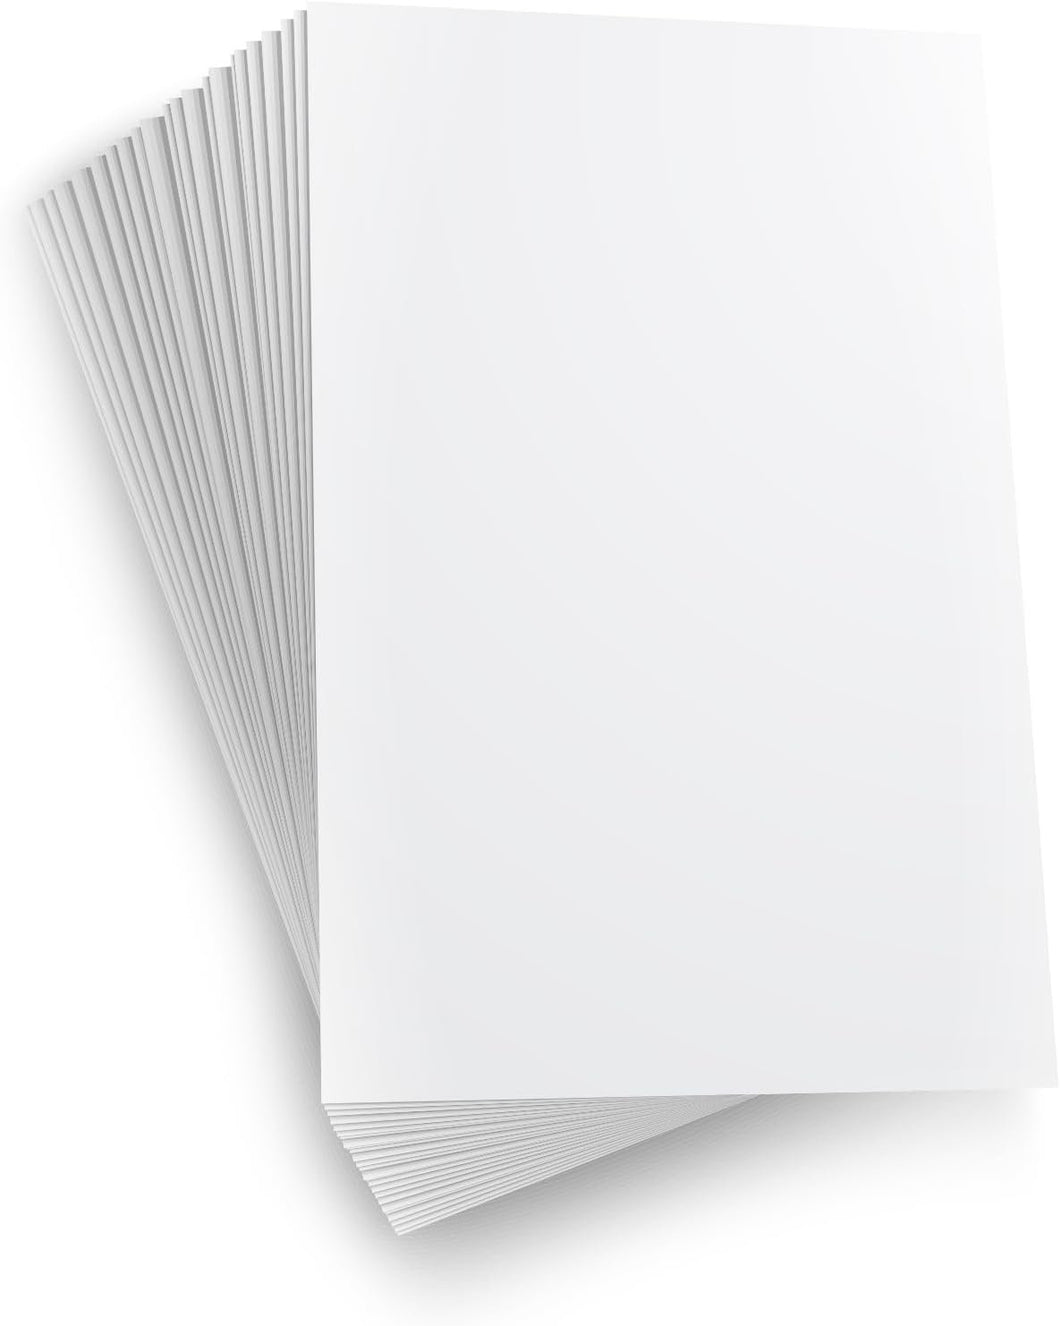  Heavyweight White Cardstock 8.5 x 11 - Thick Paper